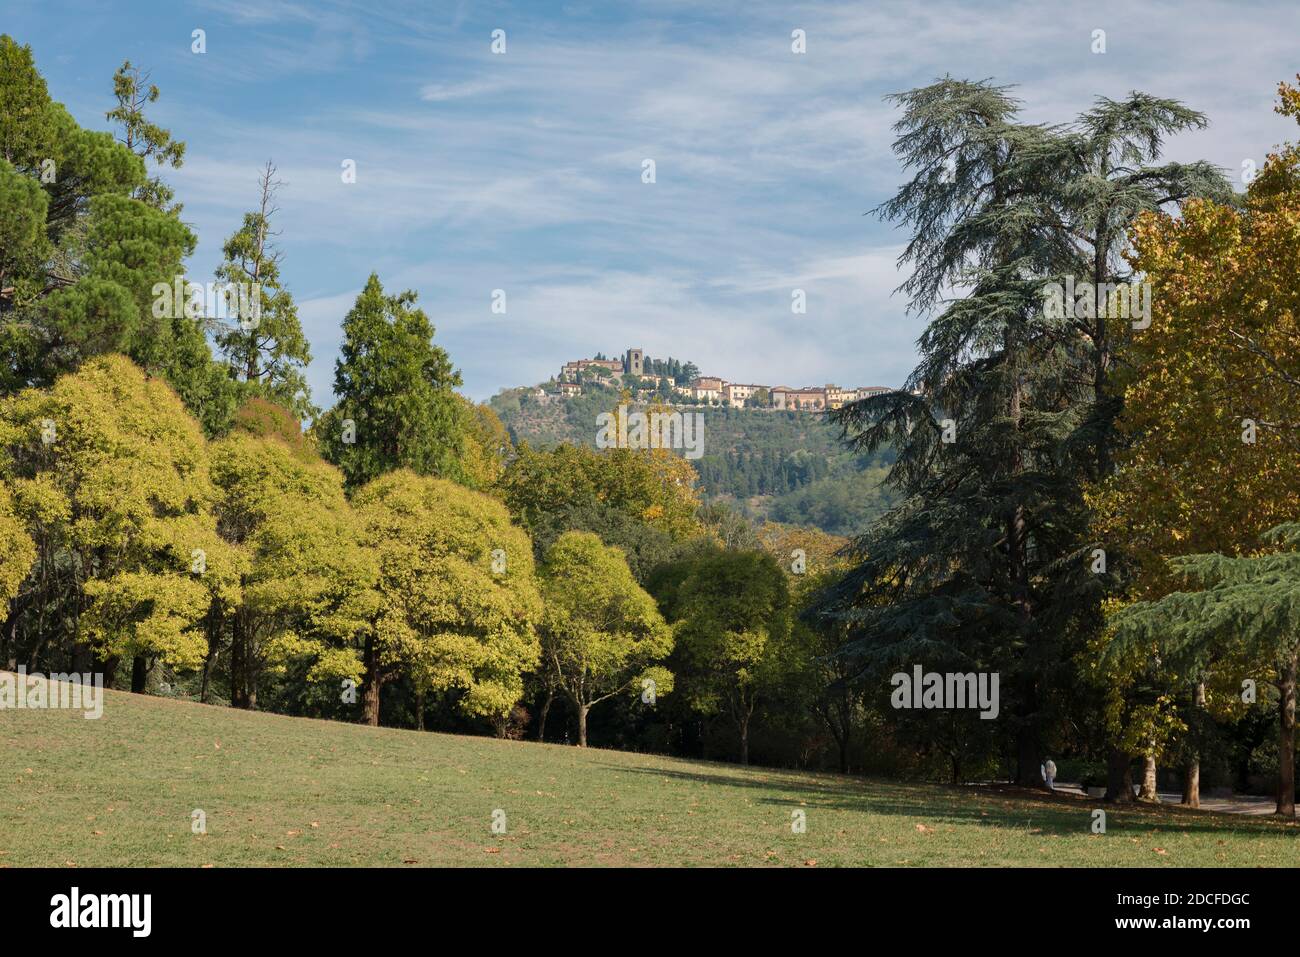 The view of the hill with the houses of Montecatini Alto through the high trees of the park of Montecatini Terme, Tuscany, Italy Stock Photo